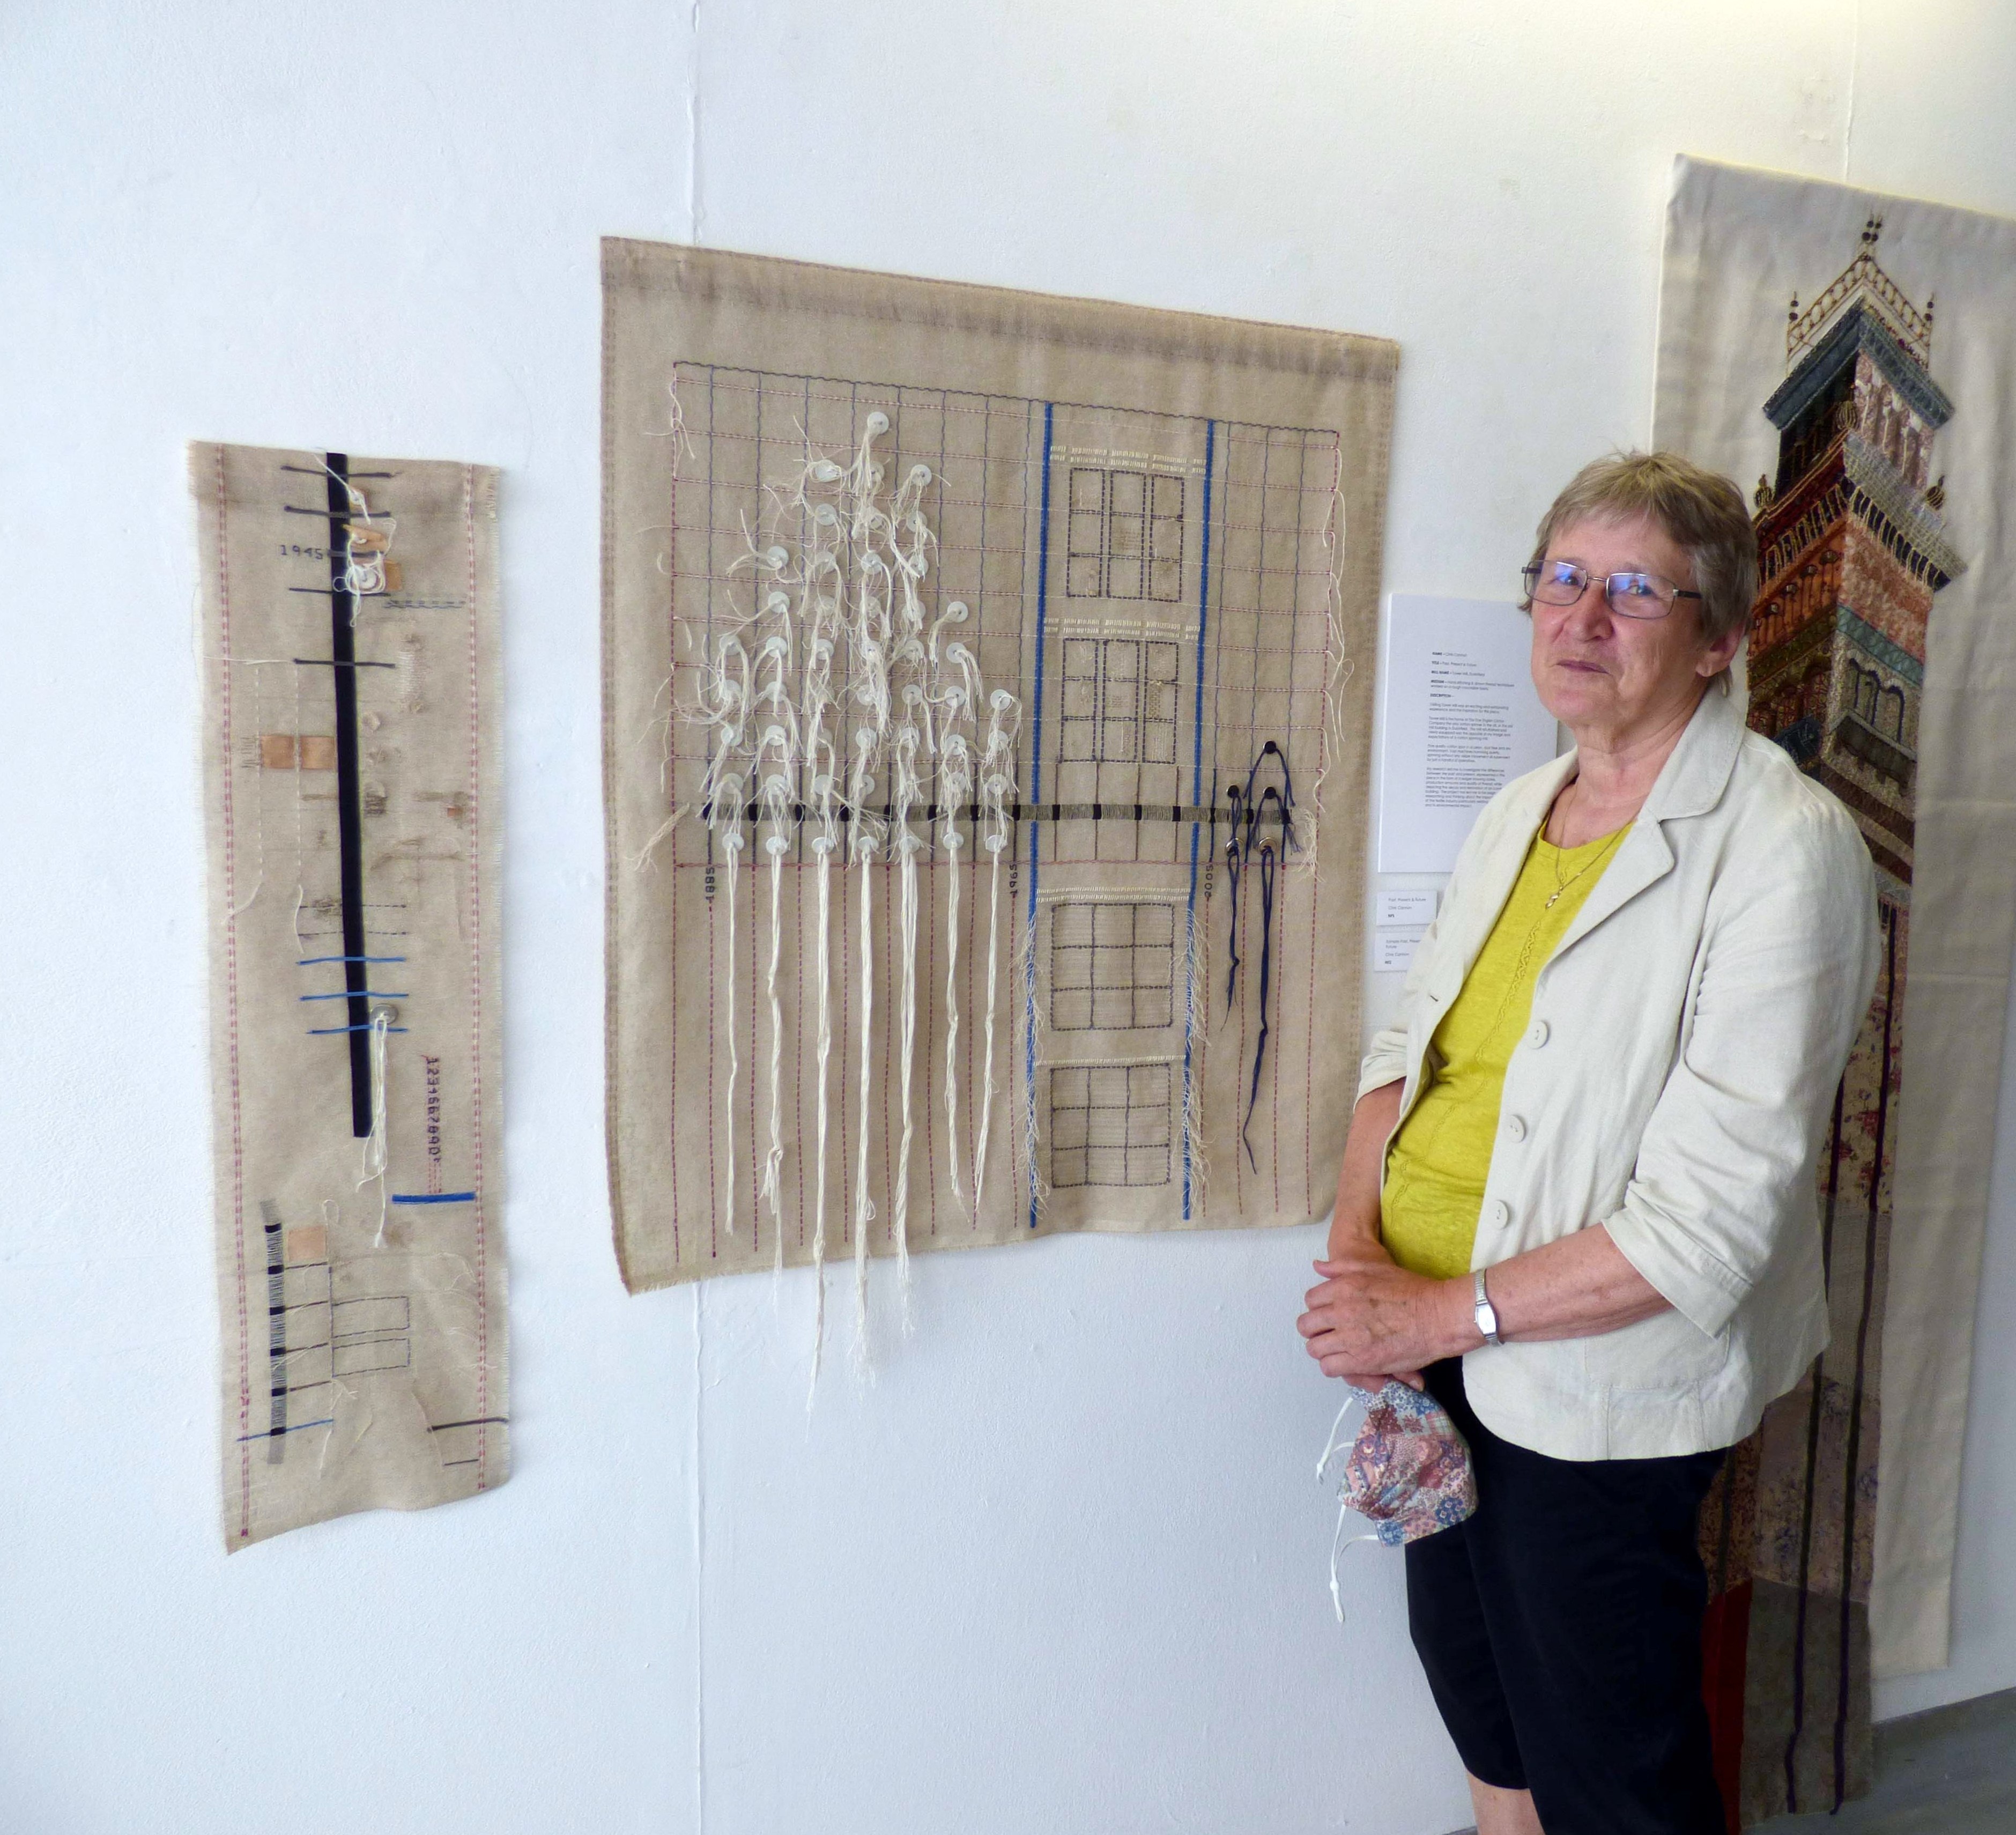 PAST, PRESENT AND FUTURE, Tower Mill, Duckinfield by Chris Cannon, hand stitching & drawn thread techniques worked on a rough countable surface, "Synergy" exhibition by Preston Threads, July 2021